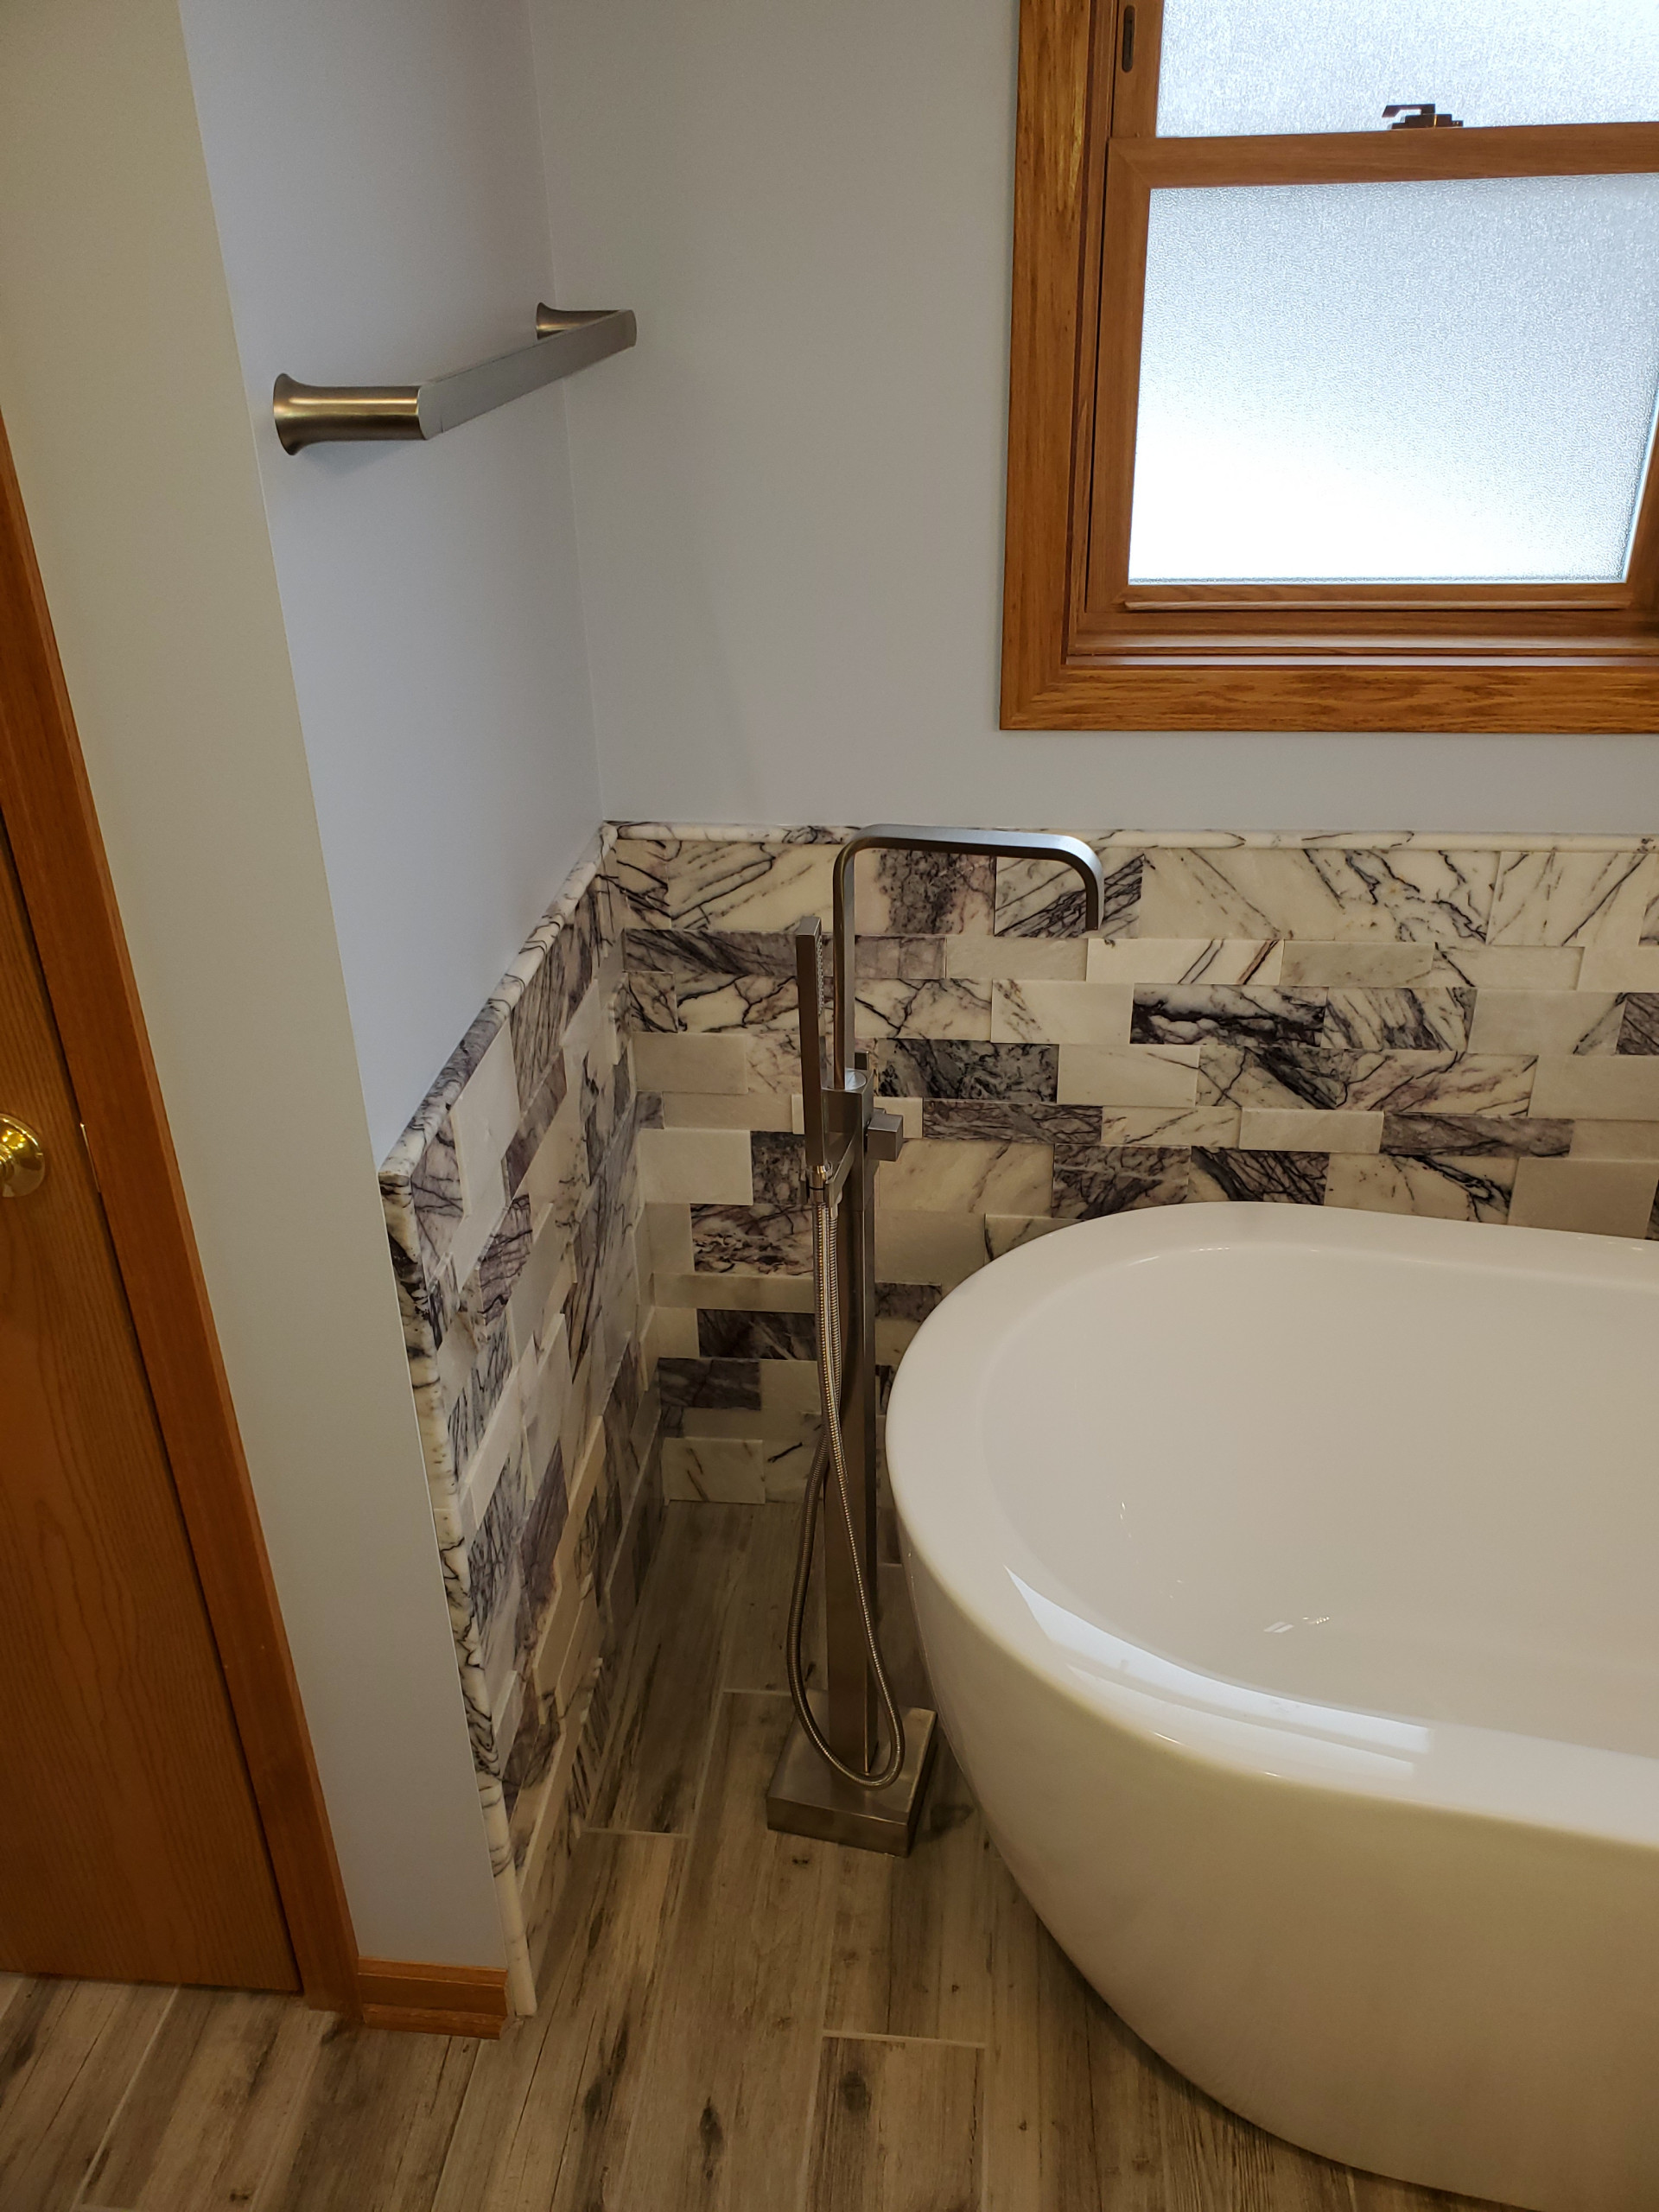 Kitchen and Bathroom Remodeling